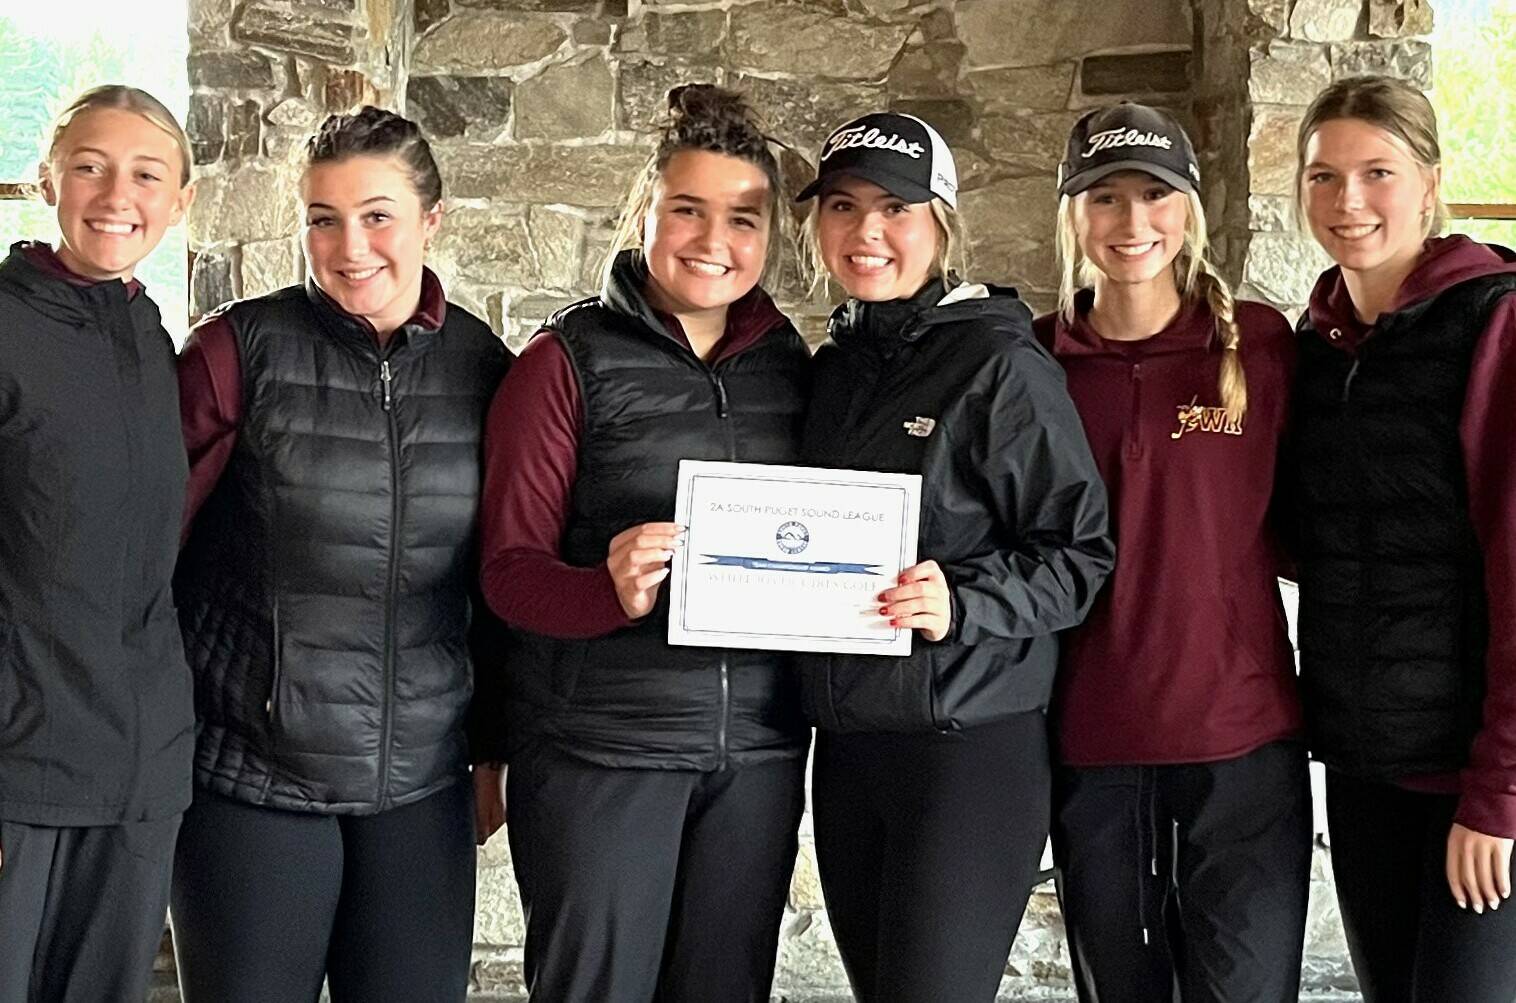 SUBMITTED PHOTO 
The White River High girls captured top honors during last week’s medalist tournament in Bremerton. Making up the winning squad were, from left; Abby Akins, Abigail Ringel, Alle Klemkow, Abby Rose, Lexie Mahler and Sophie Ross.